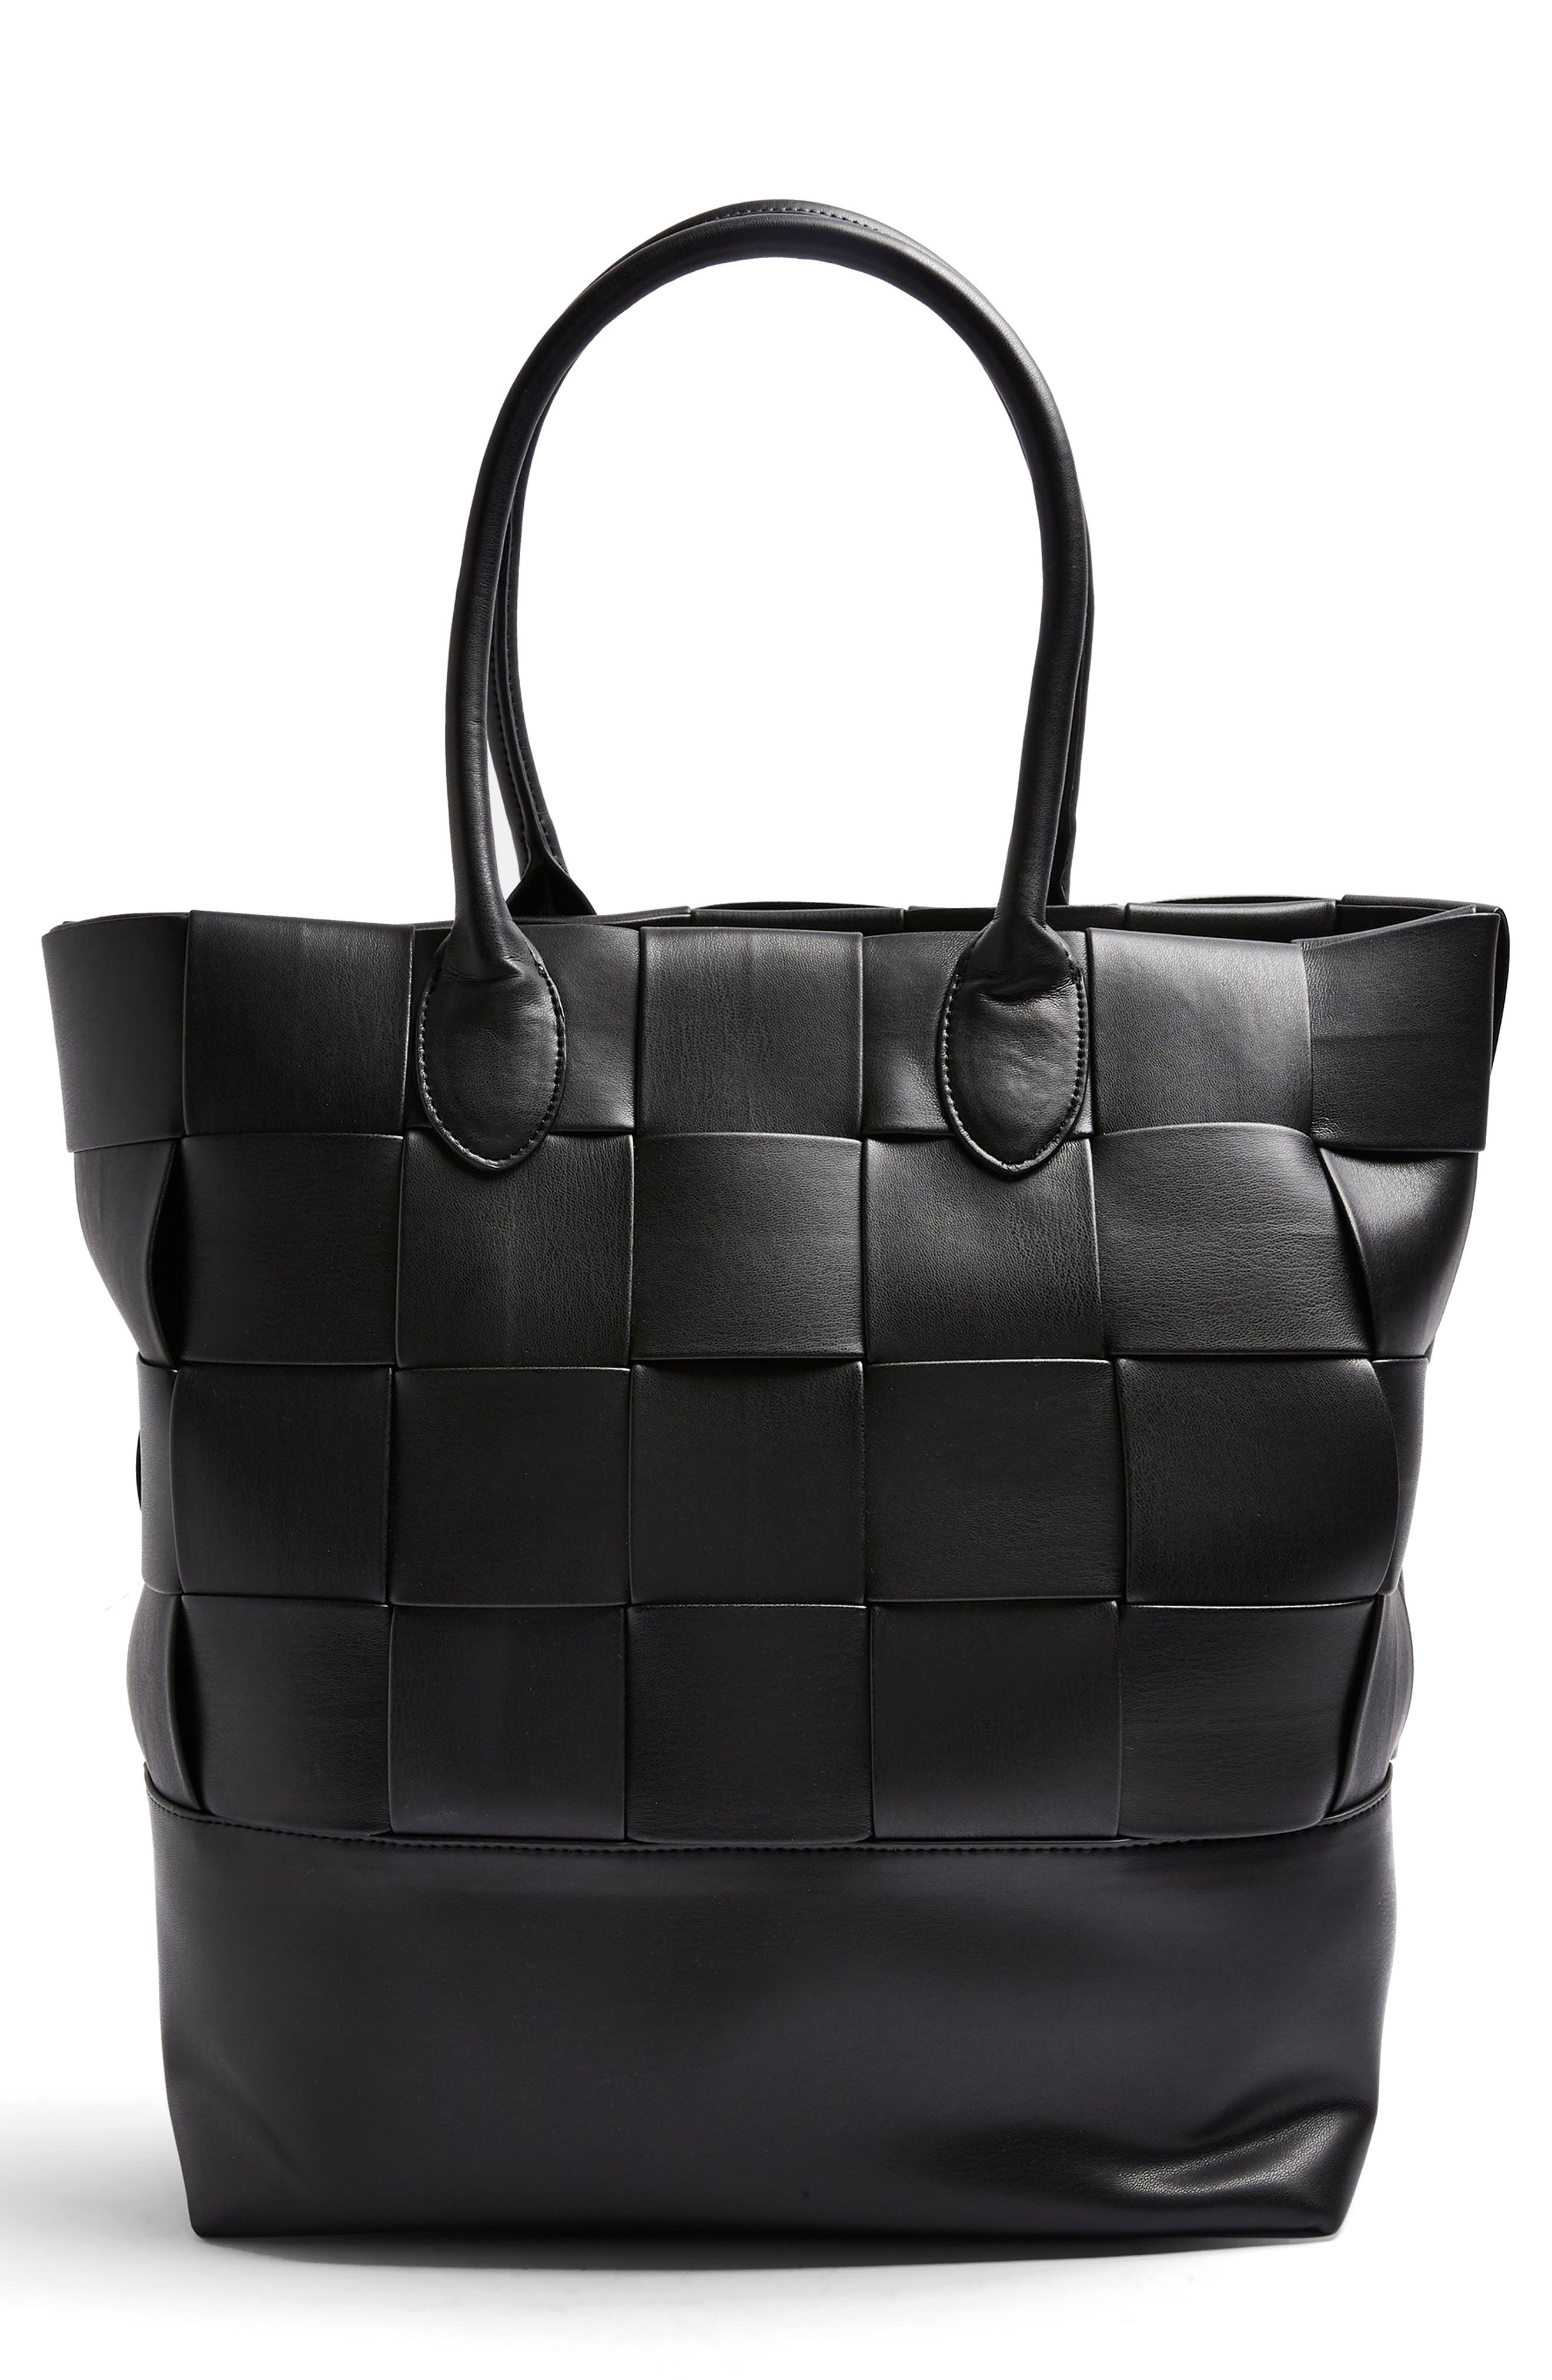 TOPSHOP WEAVE FAUX LEATHER TOTE,5045442608525